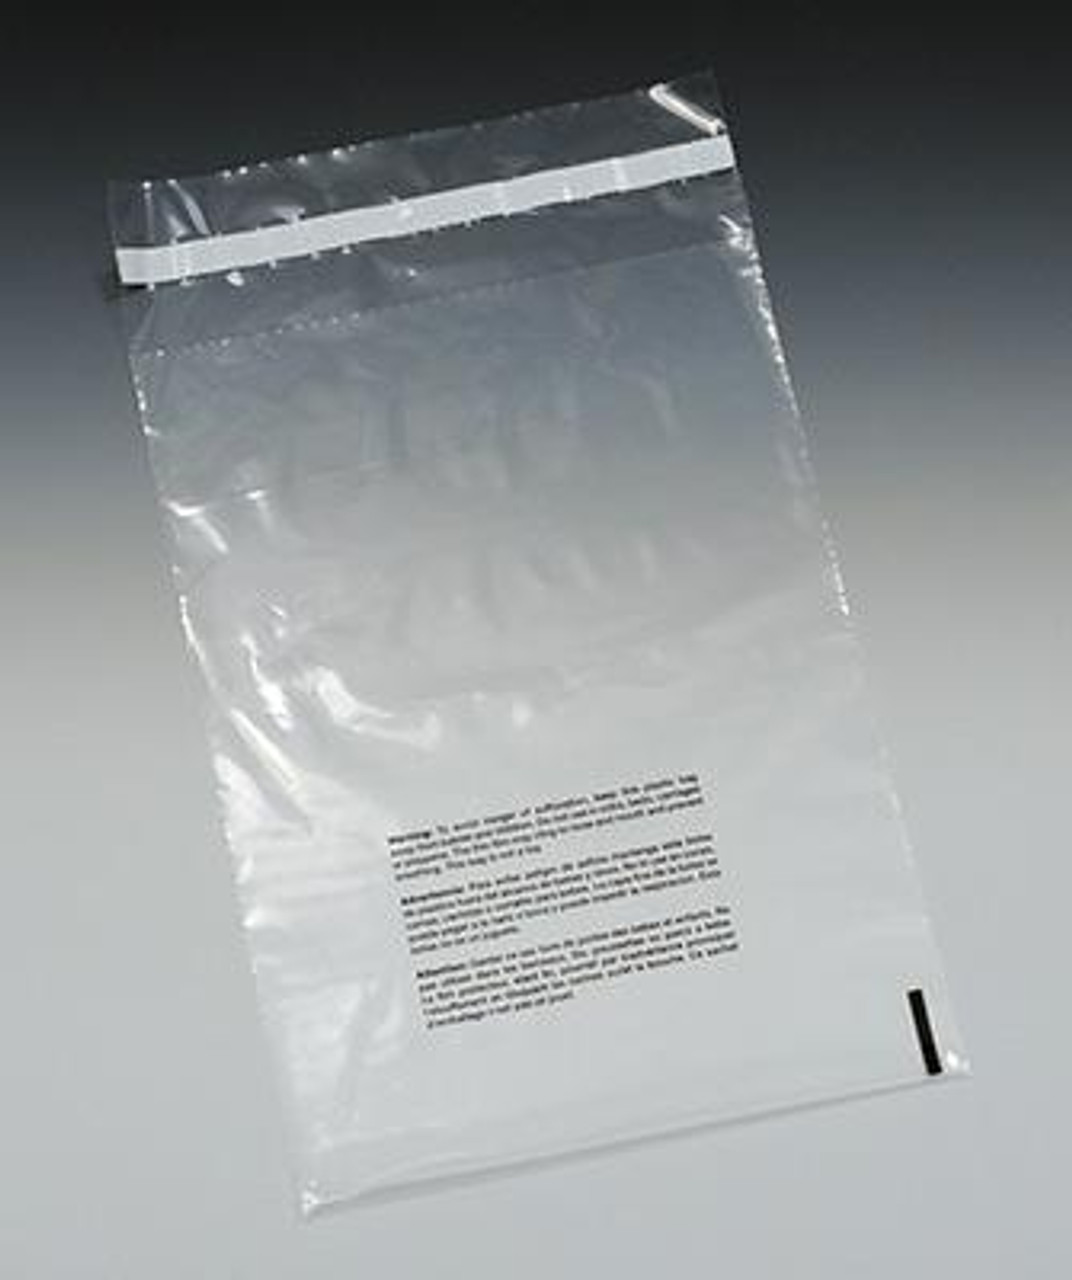 https://cdn11.bigcommerce.com/s-vxsr4nt/images/stencil/1280x1280/products/55006/26469/Self_Seal_Poly_Bags_and_Suffocation_Warning_Message__29565.1440103077.jpg?c=2